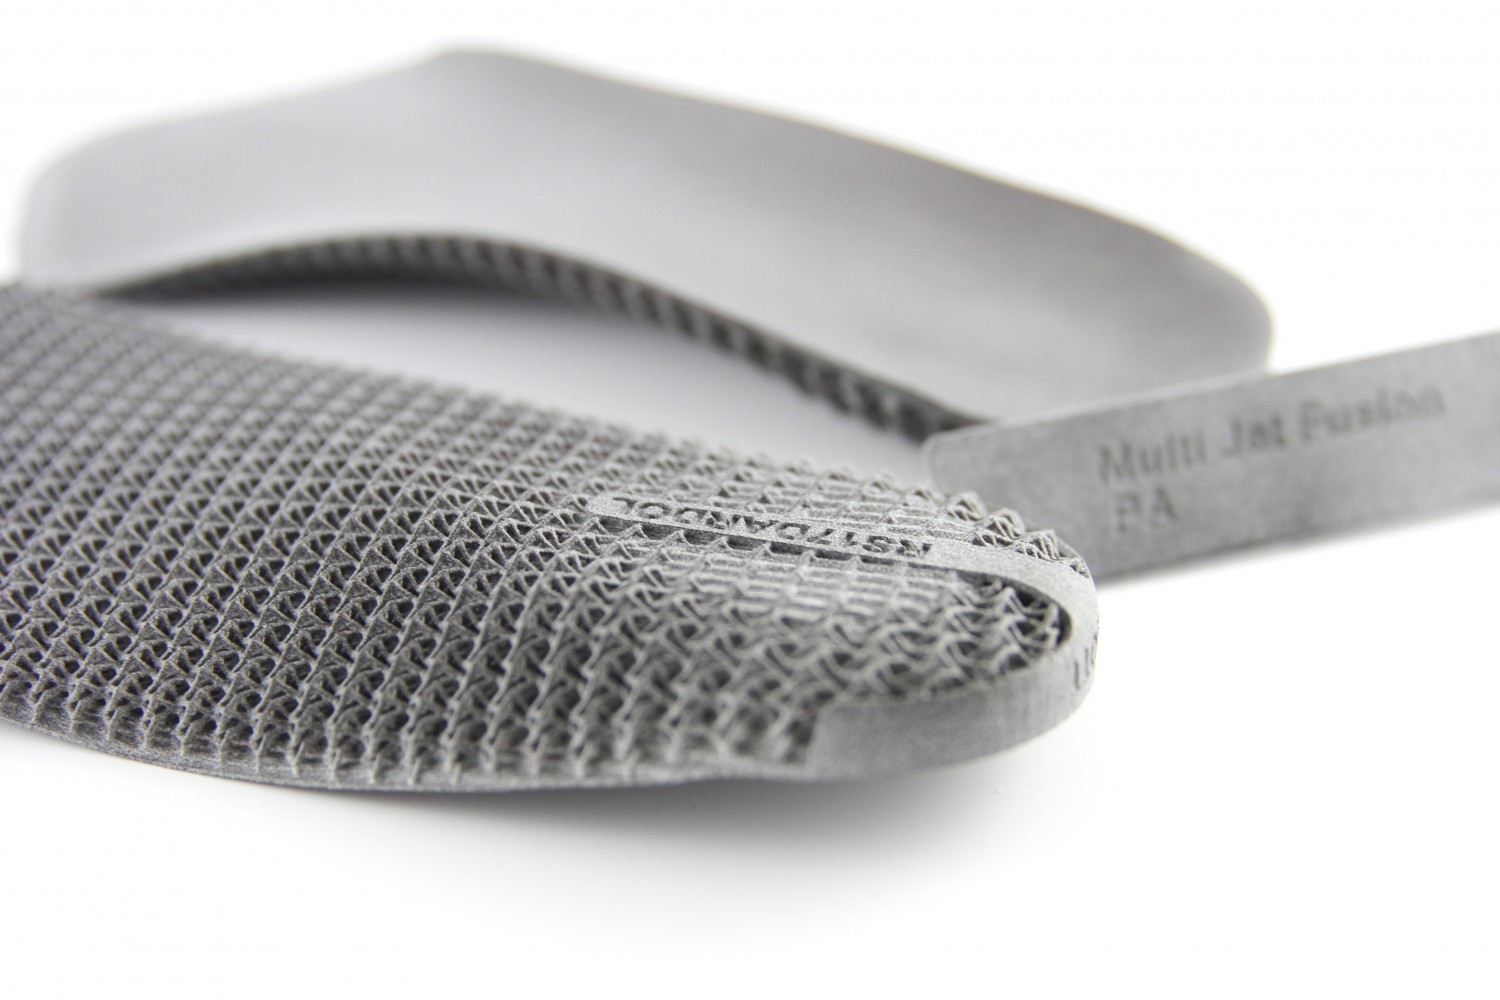 Phits insoles produced on the HP Jet Fusion 3D 4200